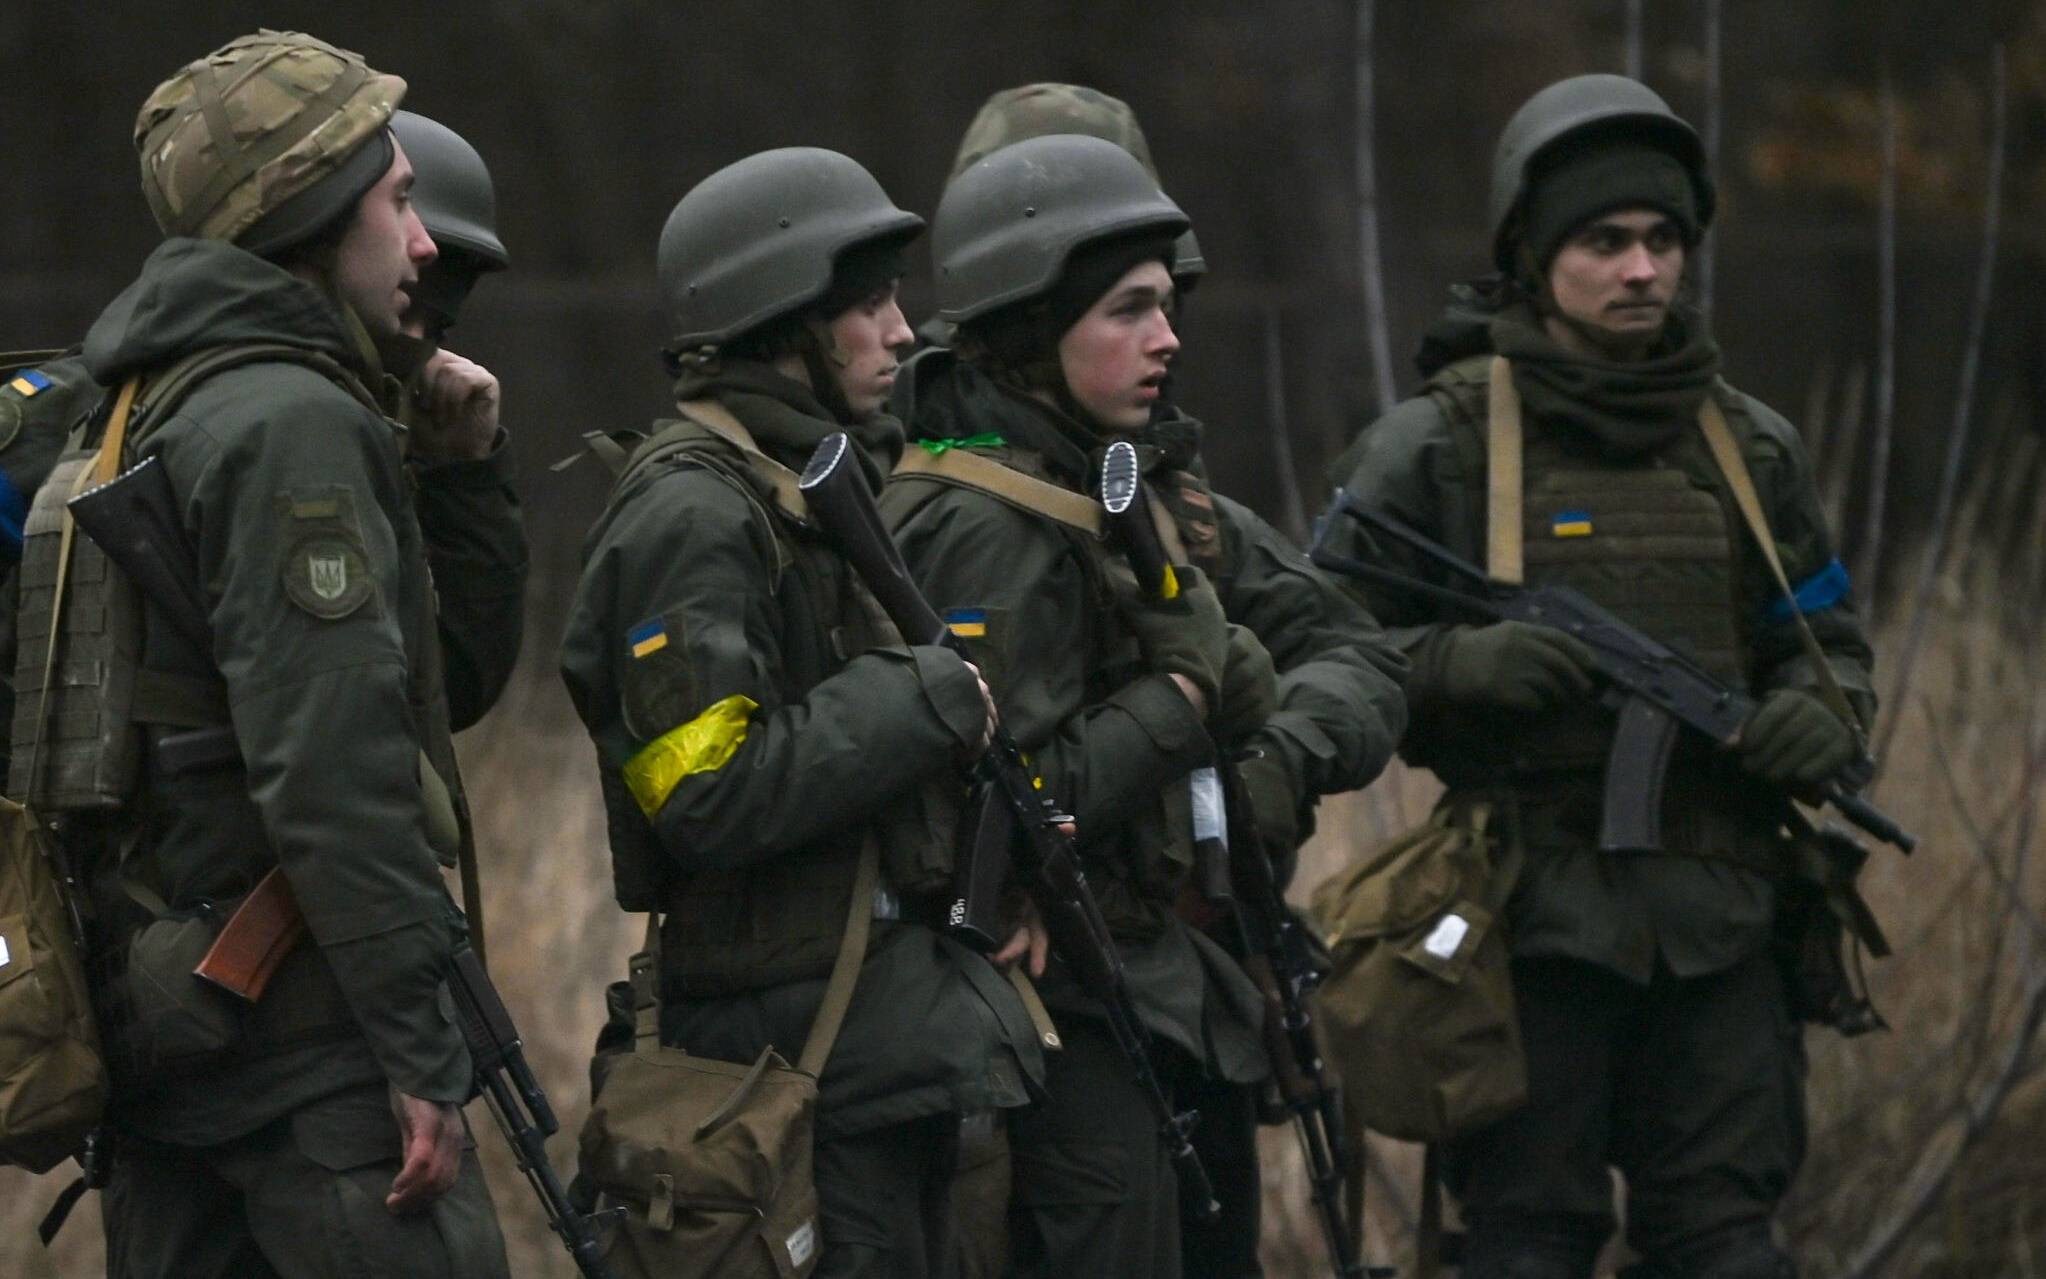 Ukrainian servicemen stand on the north of Kyiv on February 24, 2022. - Russian and Ukrainian forces are battling for control of an airbase on the northern outskirts of Kyiv, a senior Ukrainian officer said on February 24, 2022, as dozens of attack helicopters swooped on the area. (Photo by Daniel LEAL / AFP)